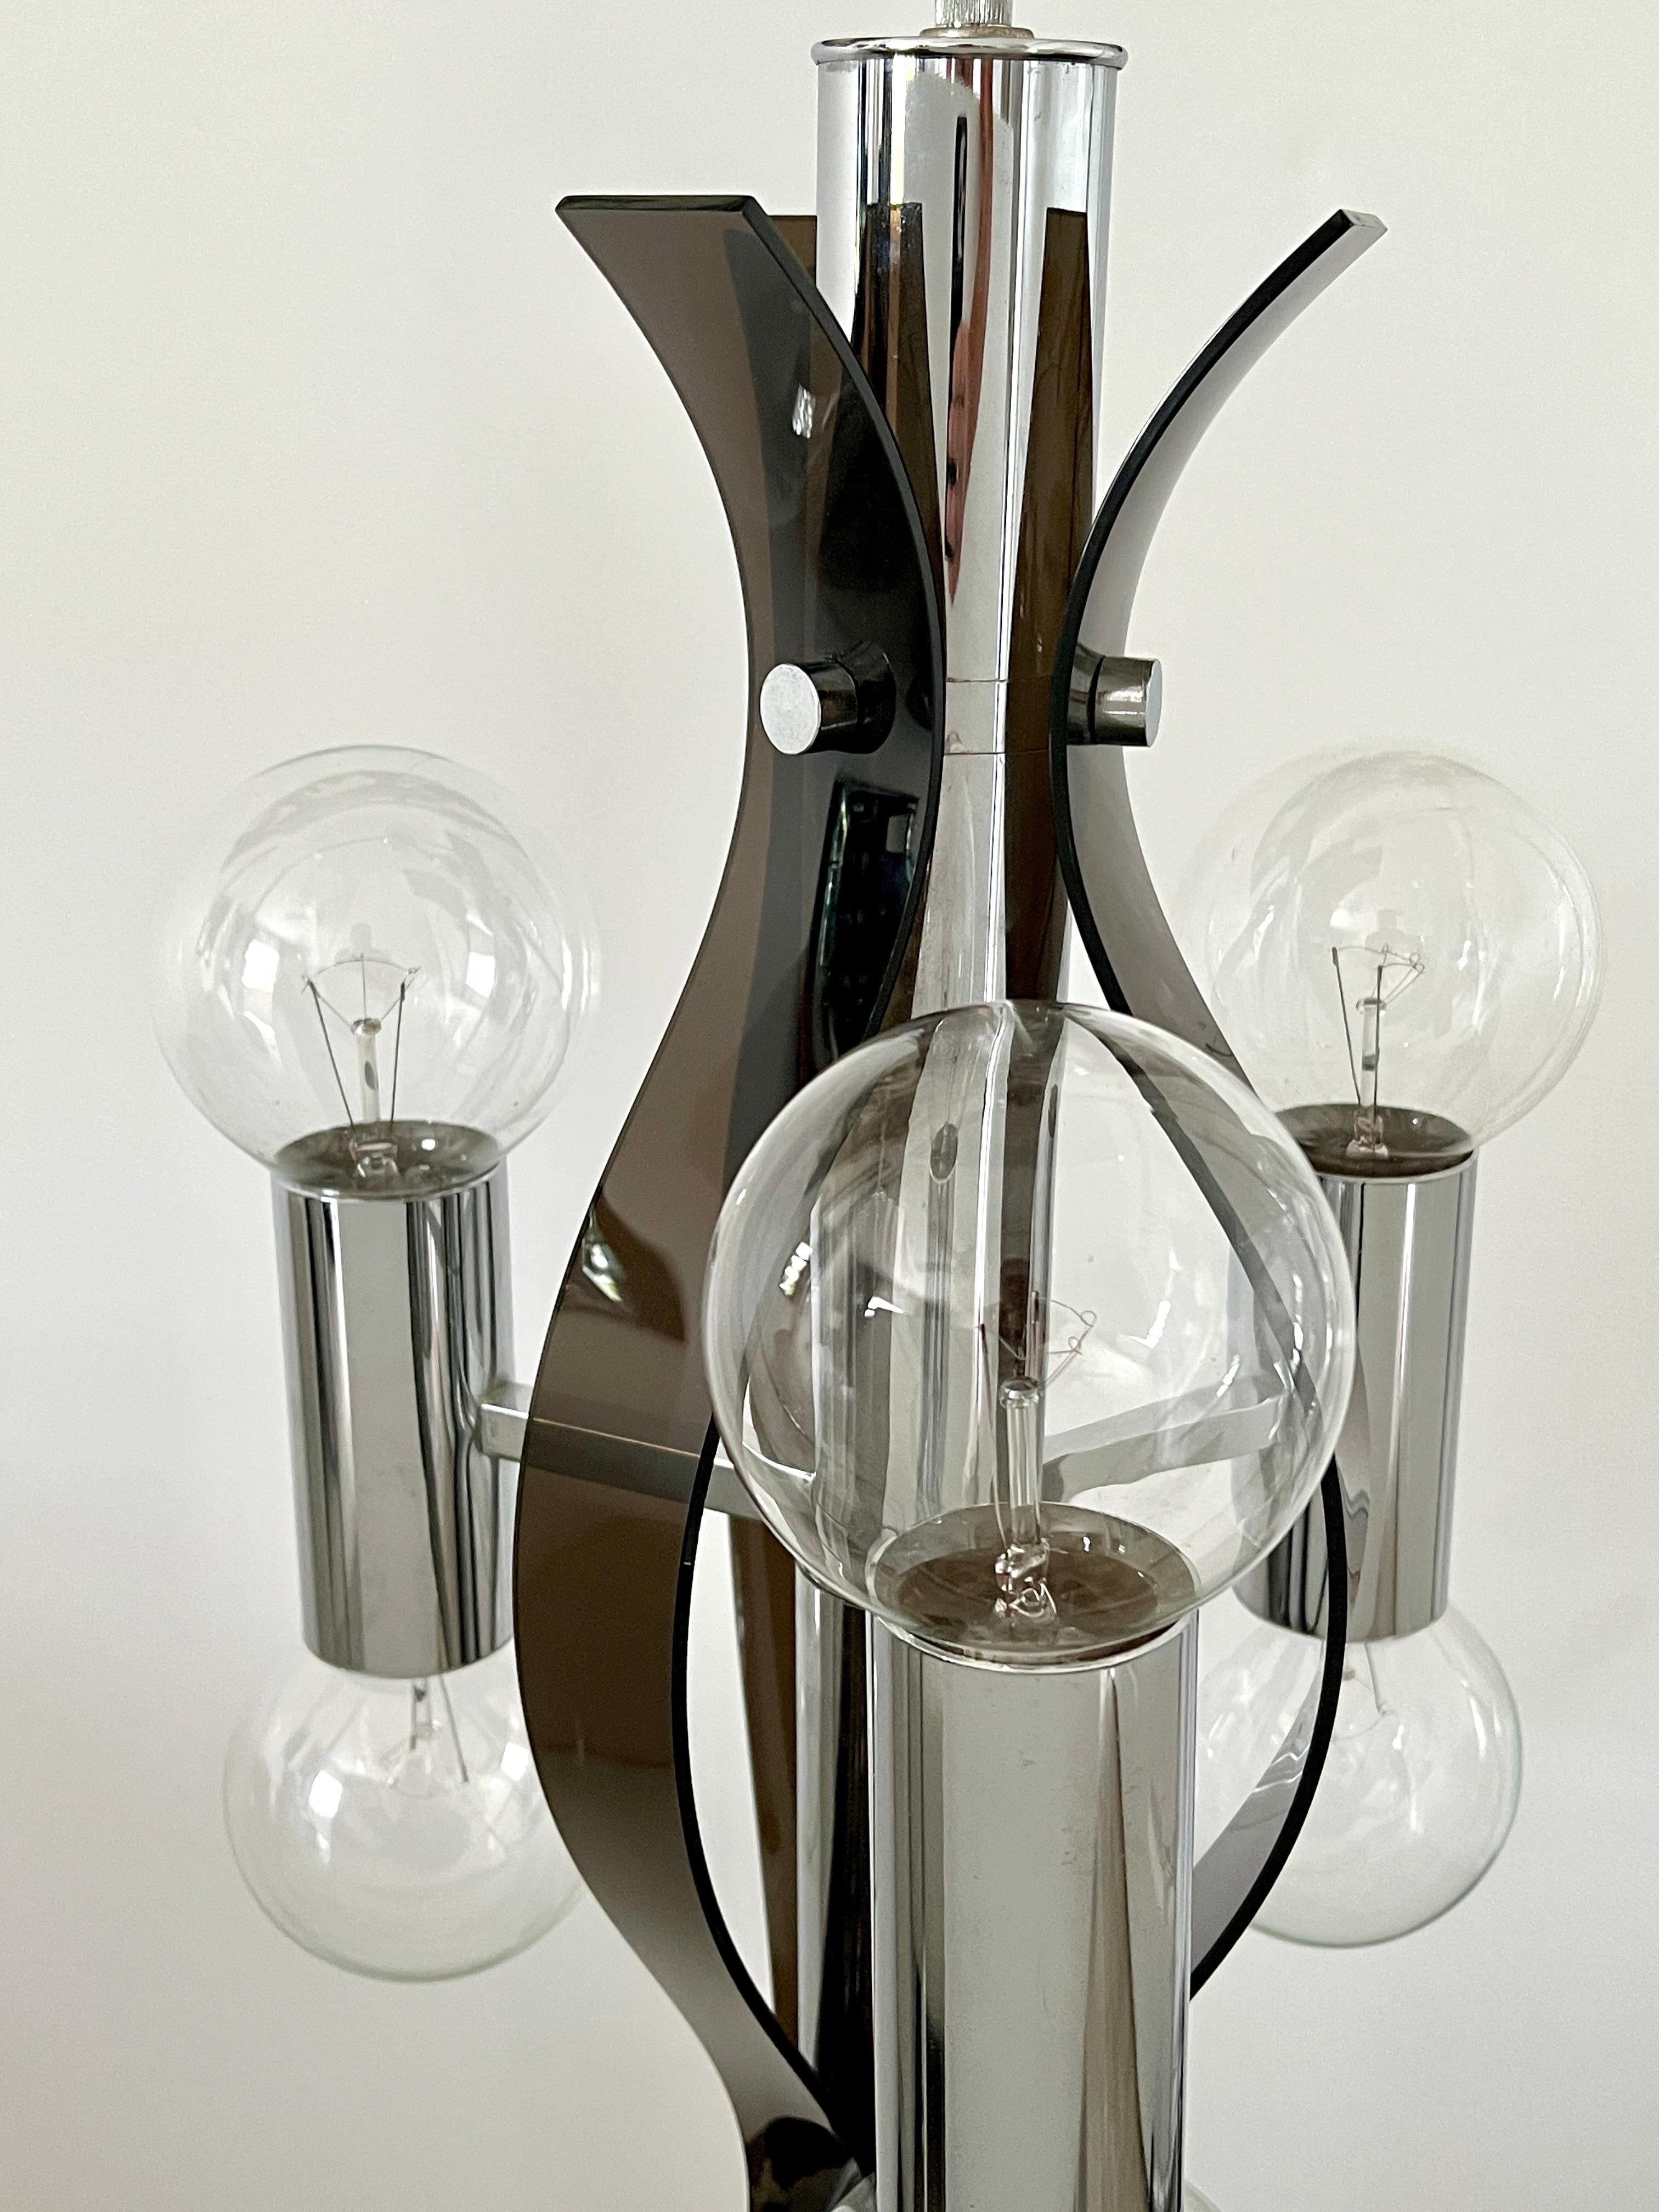 Hand-Crafted Sculptural Chandelier in Chrome and Smoked Lucite, Robert Sonneman, c. 1970's For Sale